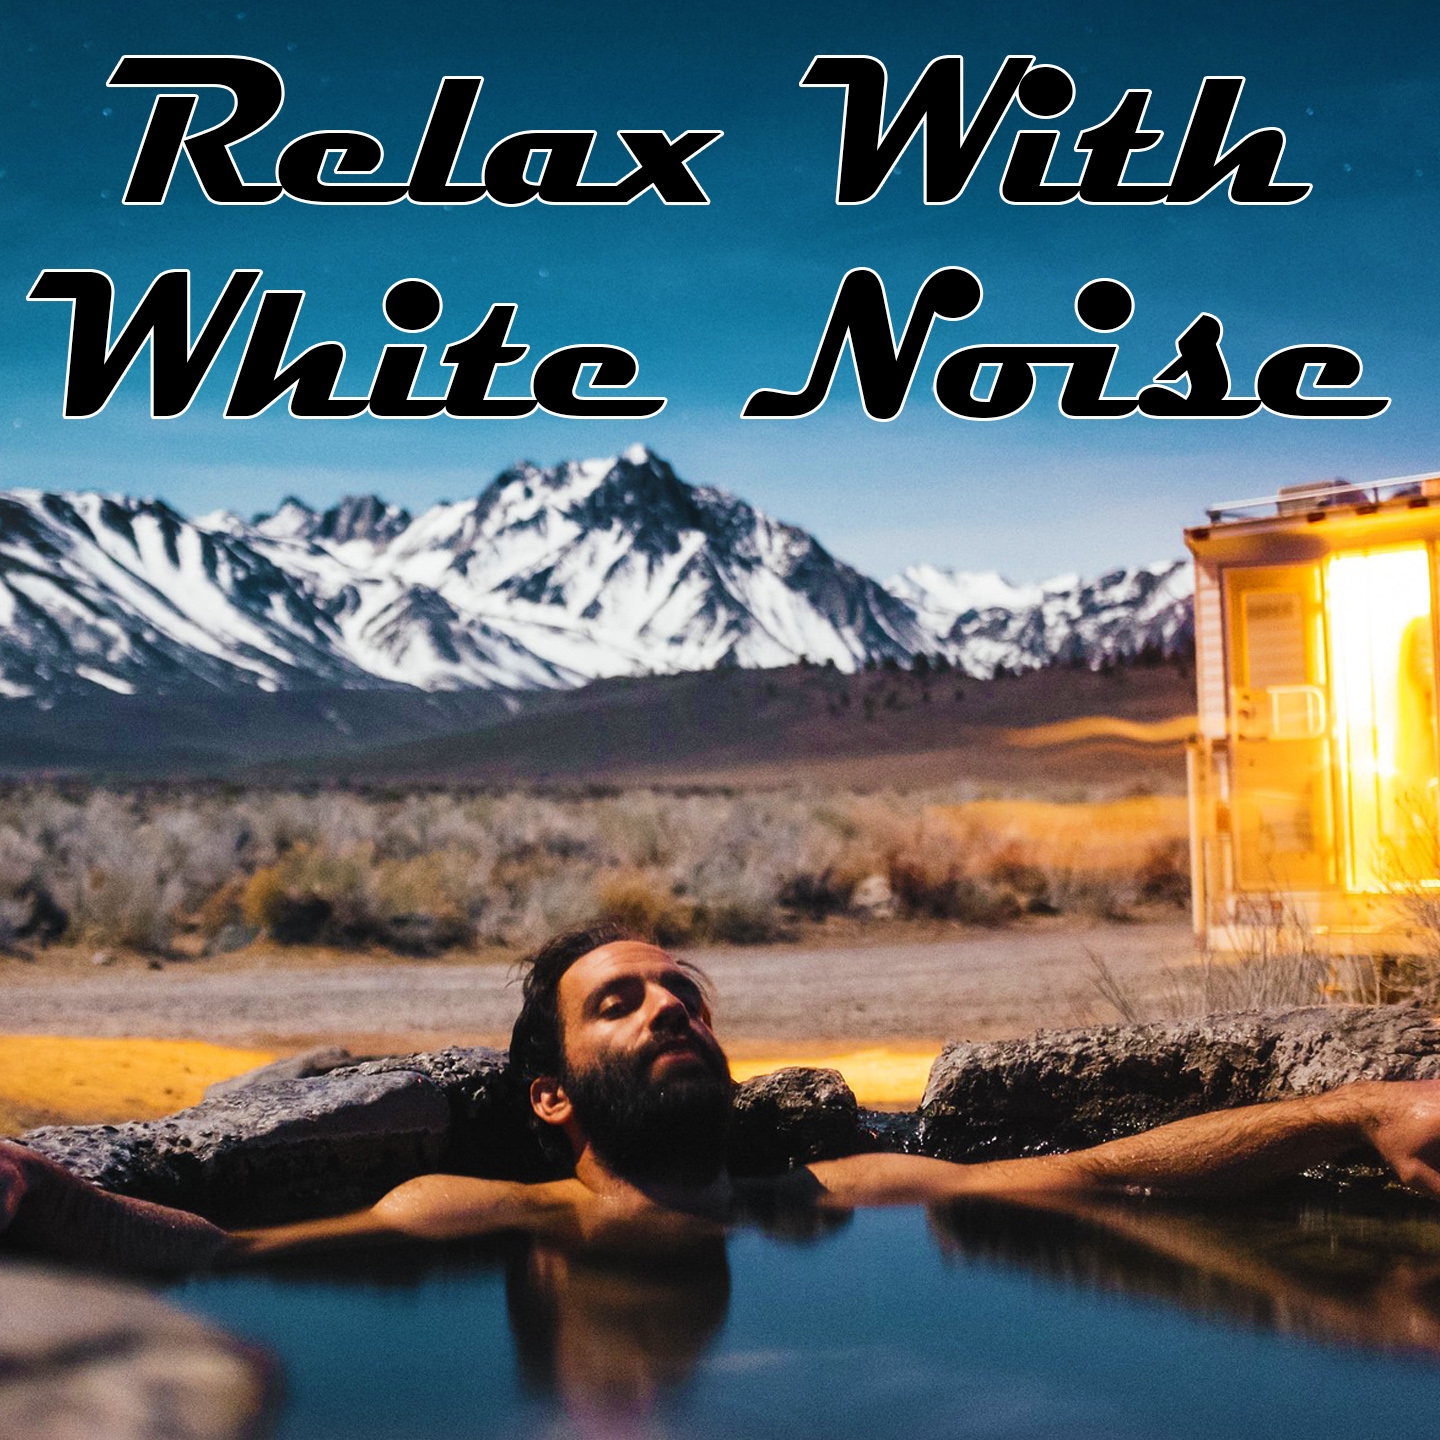 Relax With White Noise